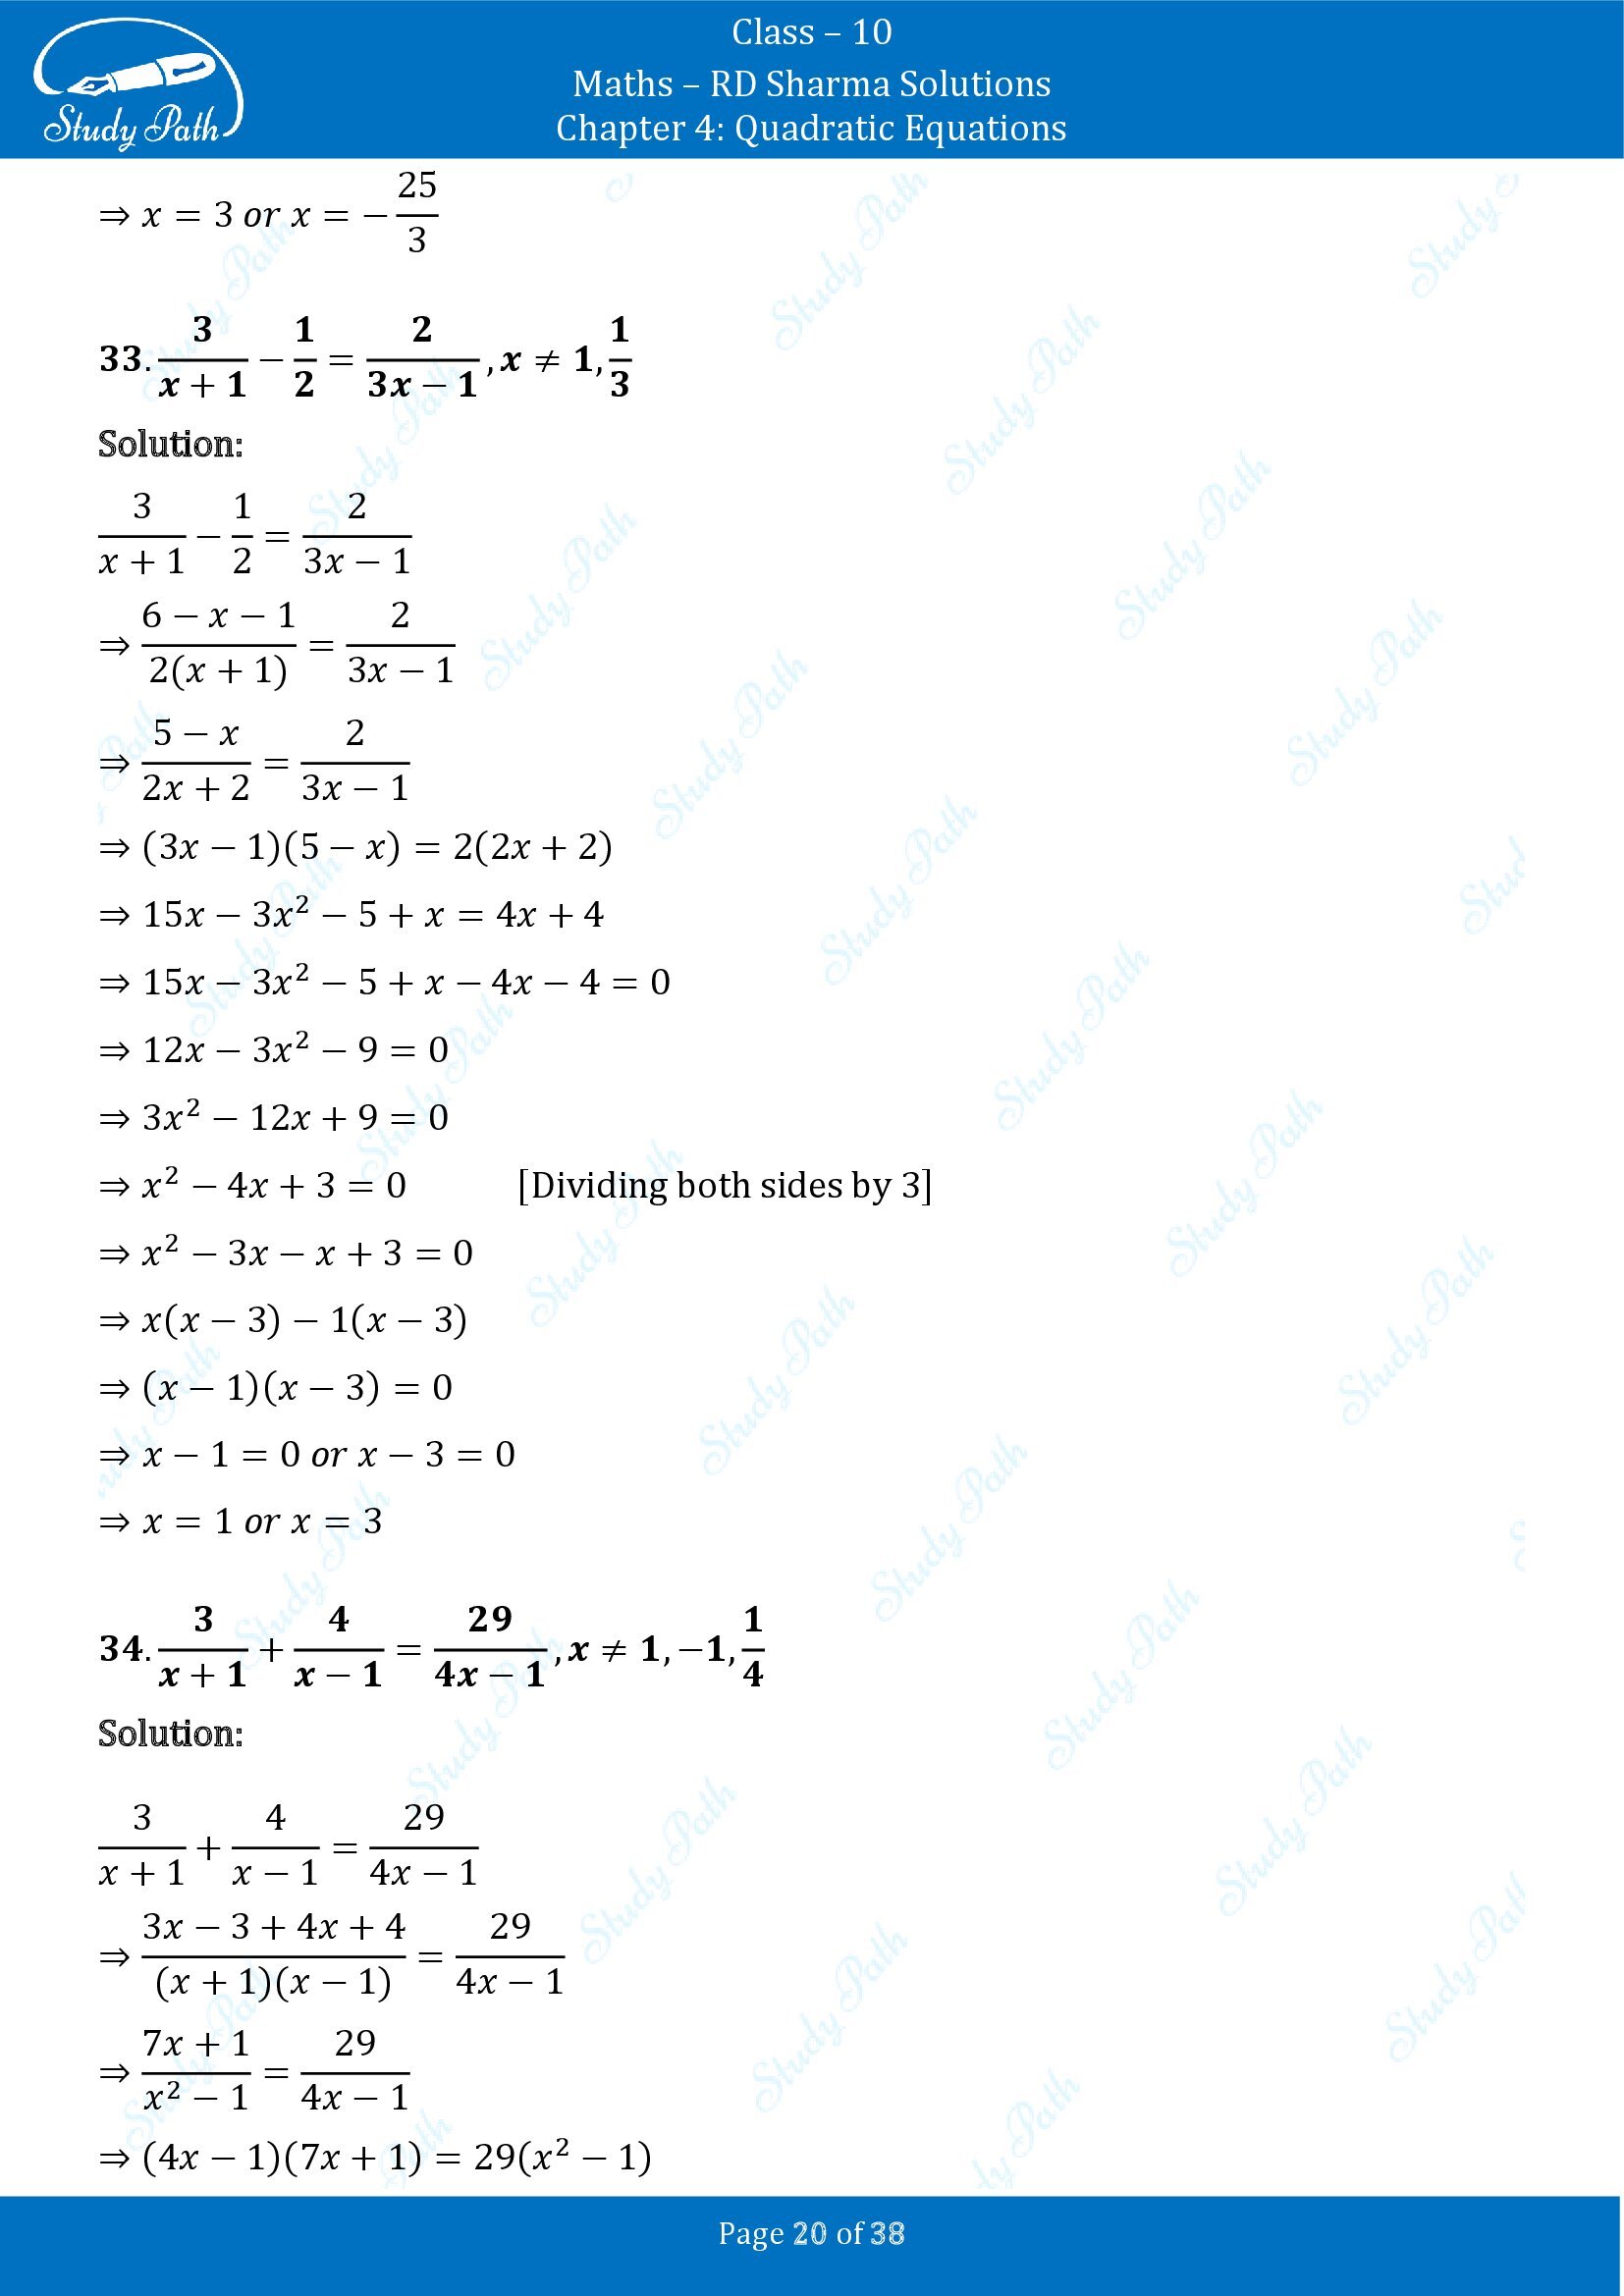 RD Sharma Solutions Class 10 Chapter 4 Quadratic Equations Exercise 4.3 00020